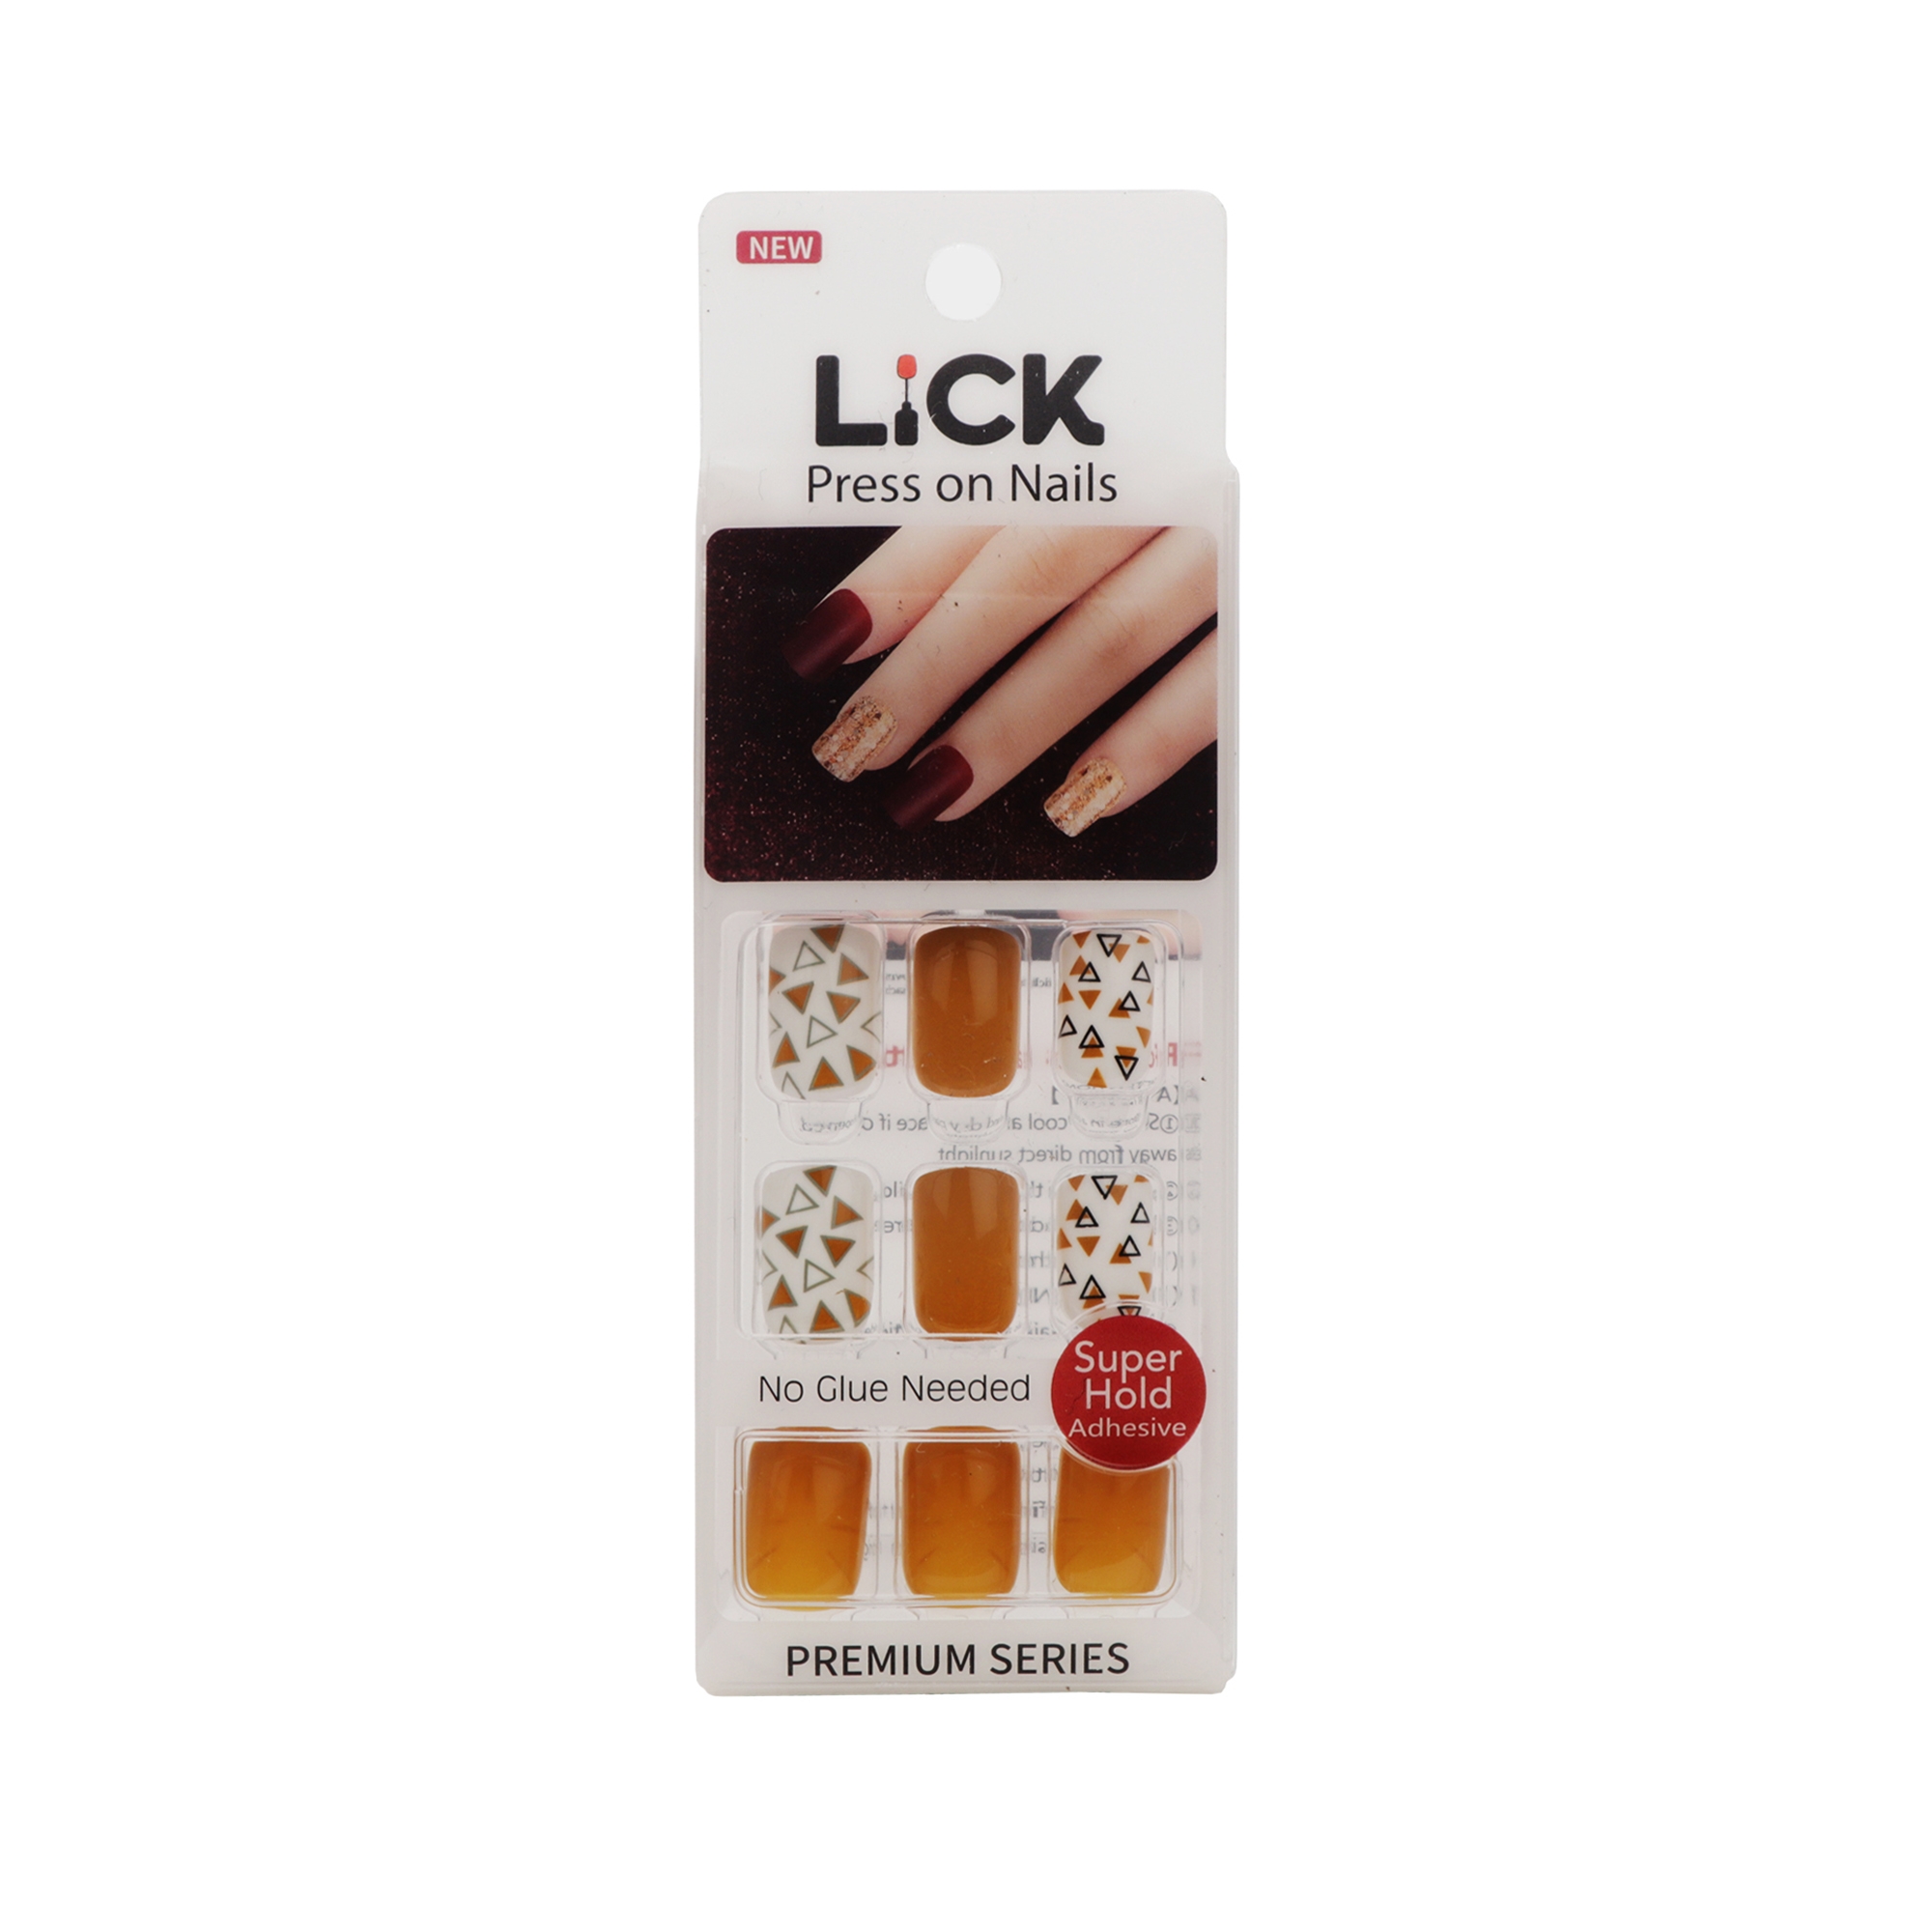 Archies | Archies Lick Press on Artificial Nails No Glue Needed Premium Quality LC-03 Combo Pack of 2 2